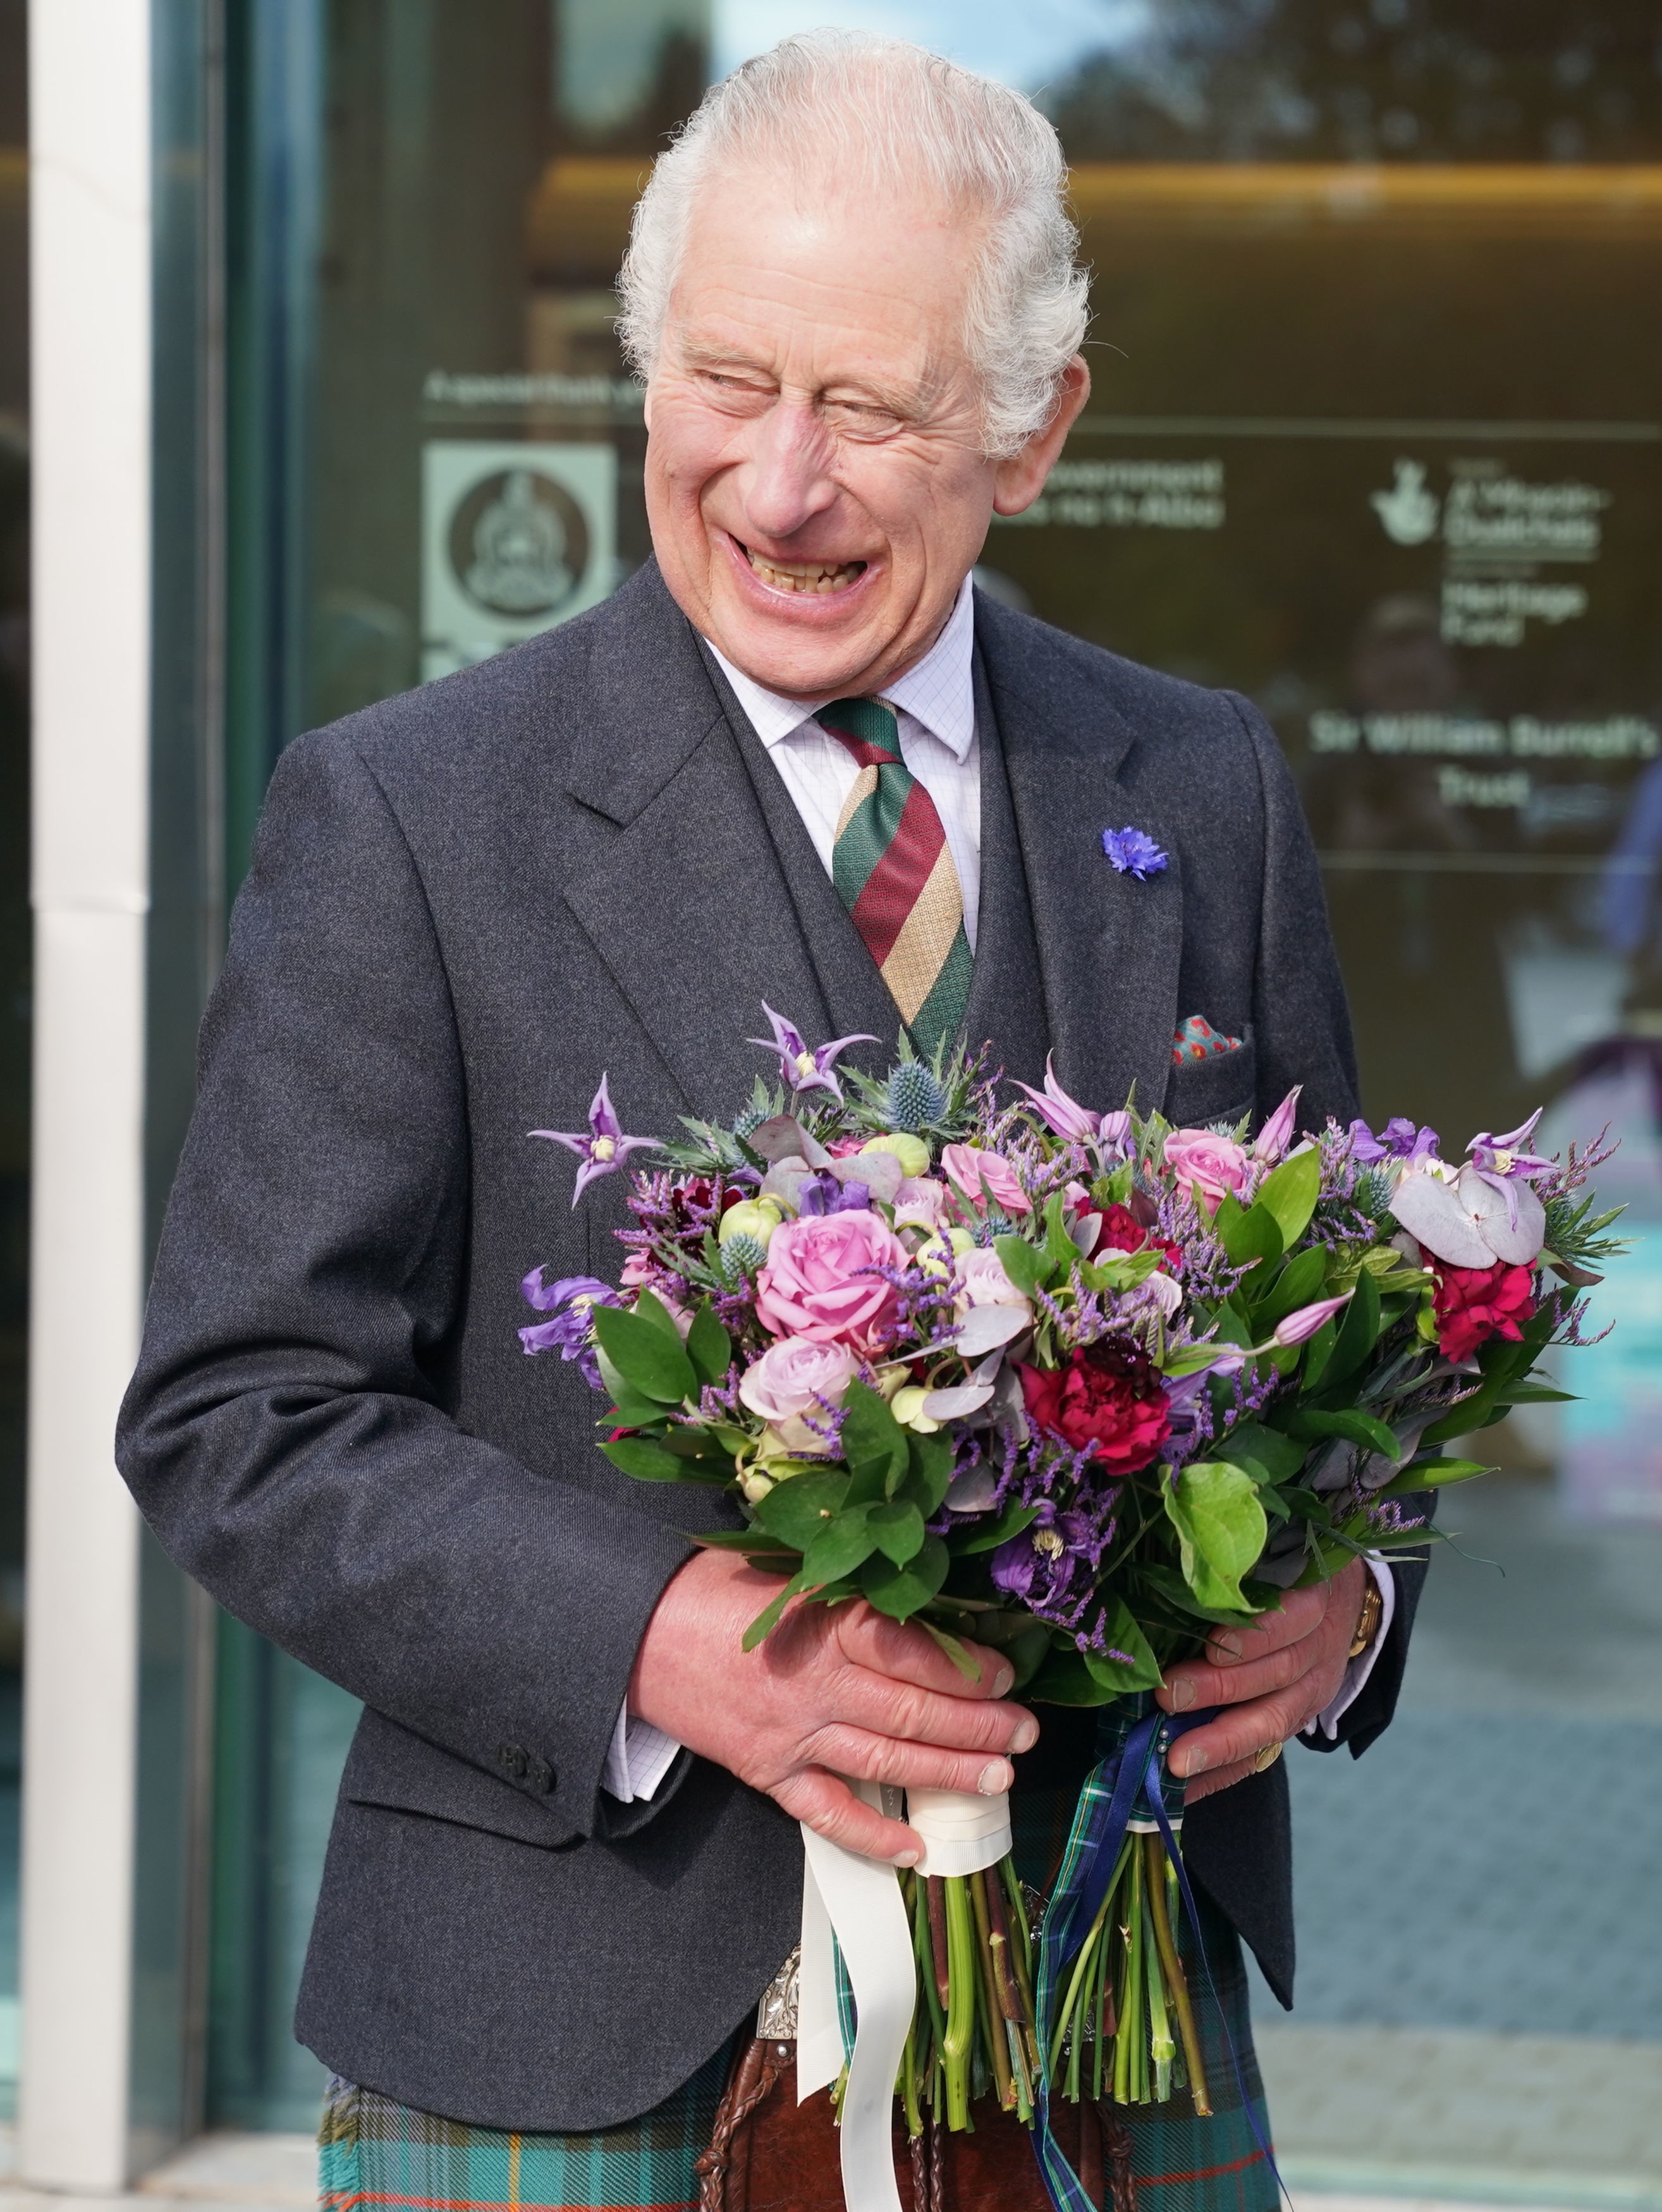 <p>King Charles III collected bouquets of flowers from well-wishers while officially re-opening the Burrell Collection at Pollok Country Park in Glasgow, Scotland, on Oct. 13, 2022, following a six-year refurbishment project.</p>